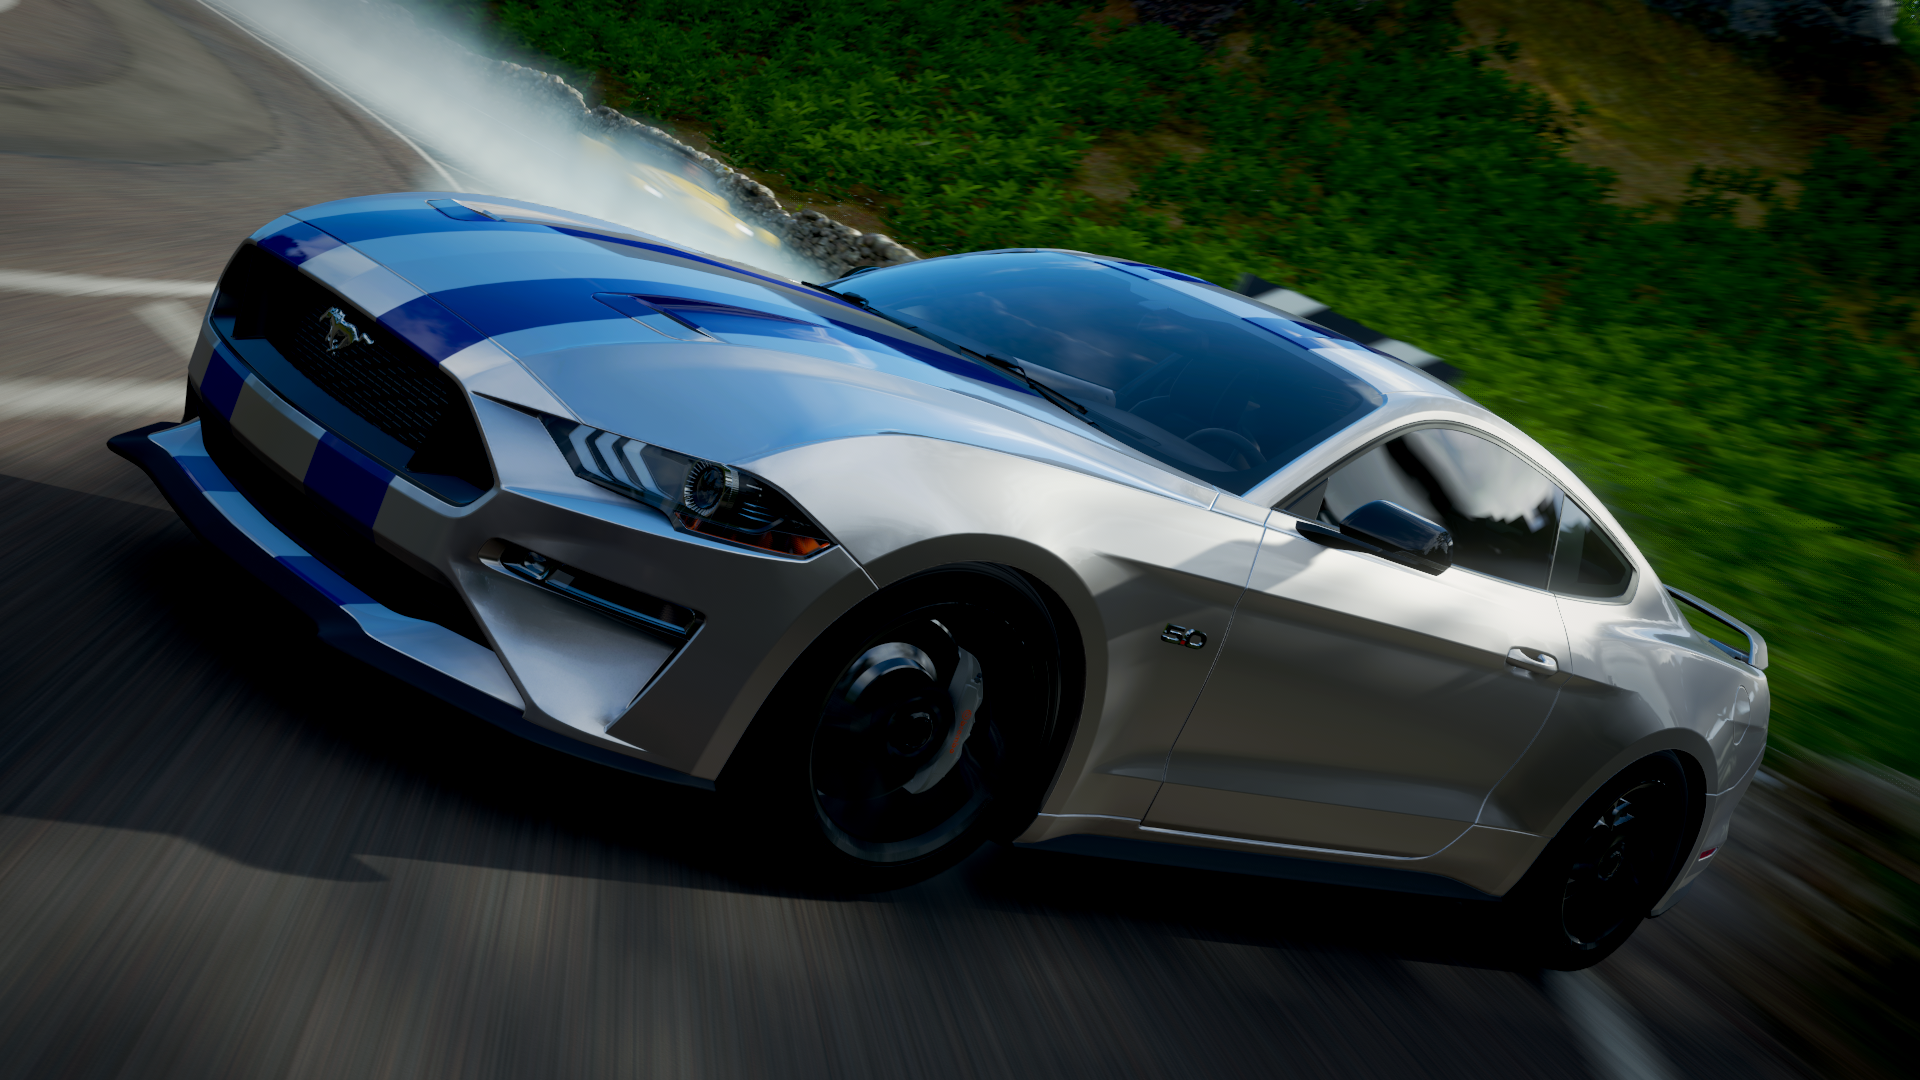 General 1920x1080 Shelby car Ford Ford Mustang Forza Horizon 4 CGI video games road side view